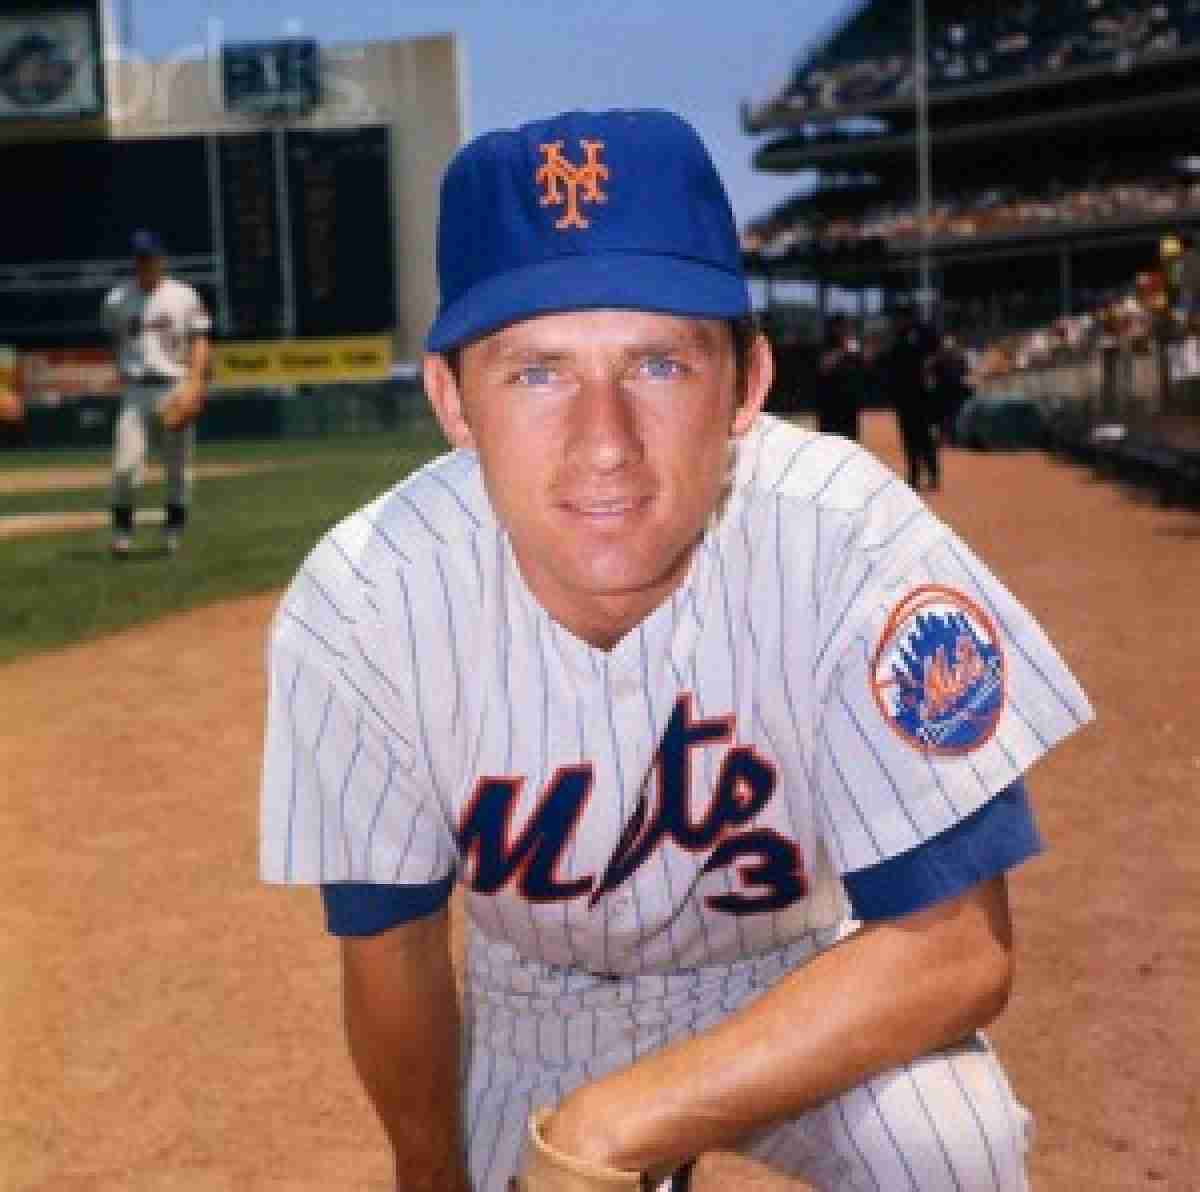 Not in Hall of Fame - 17. Bud Harrelson